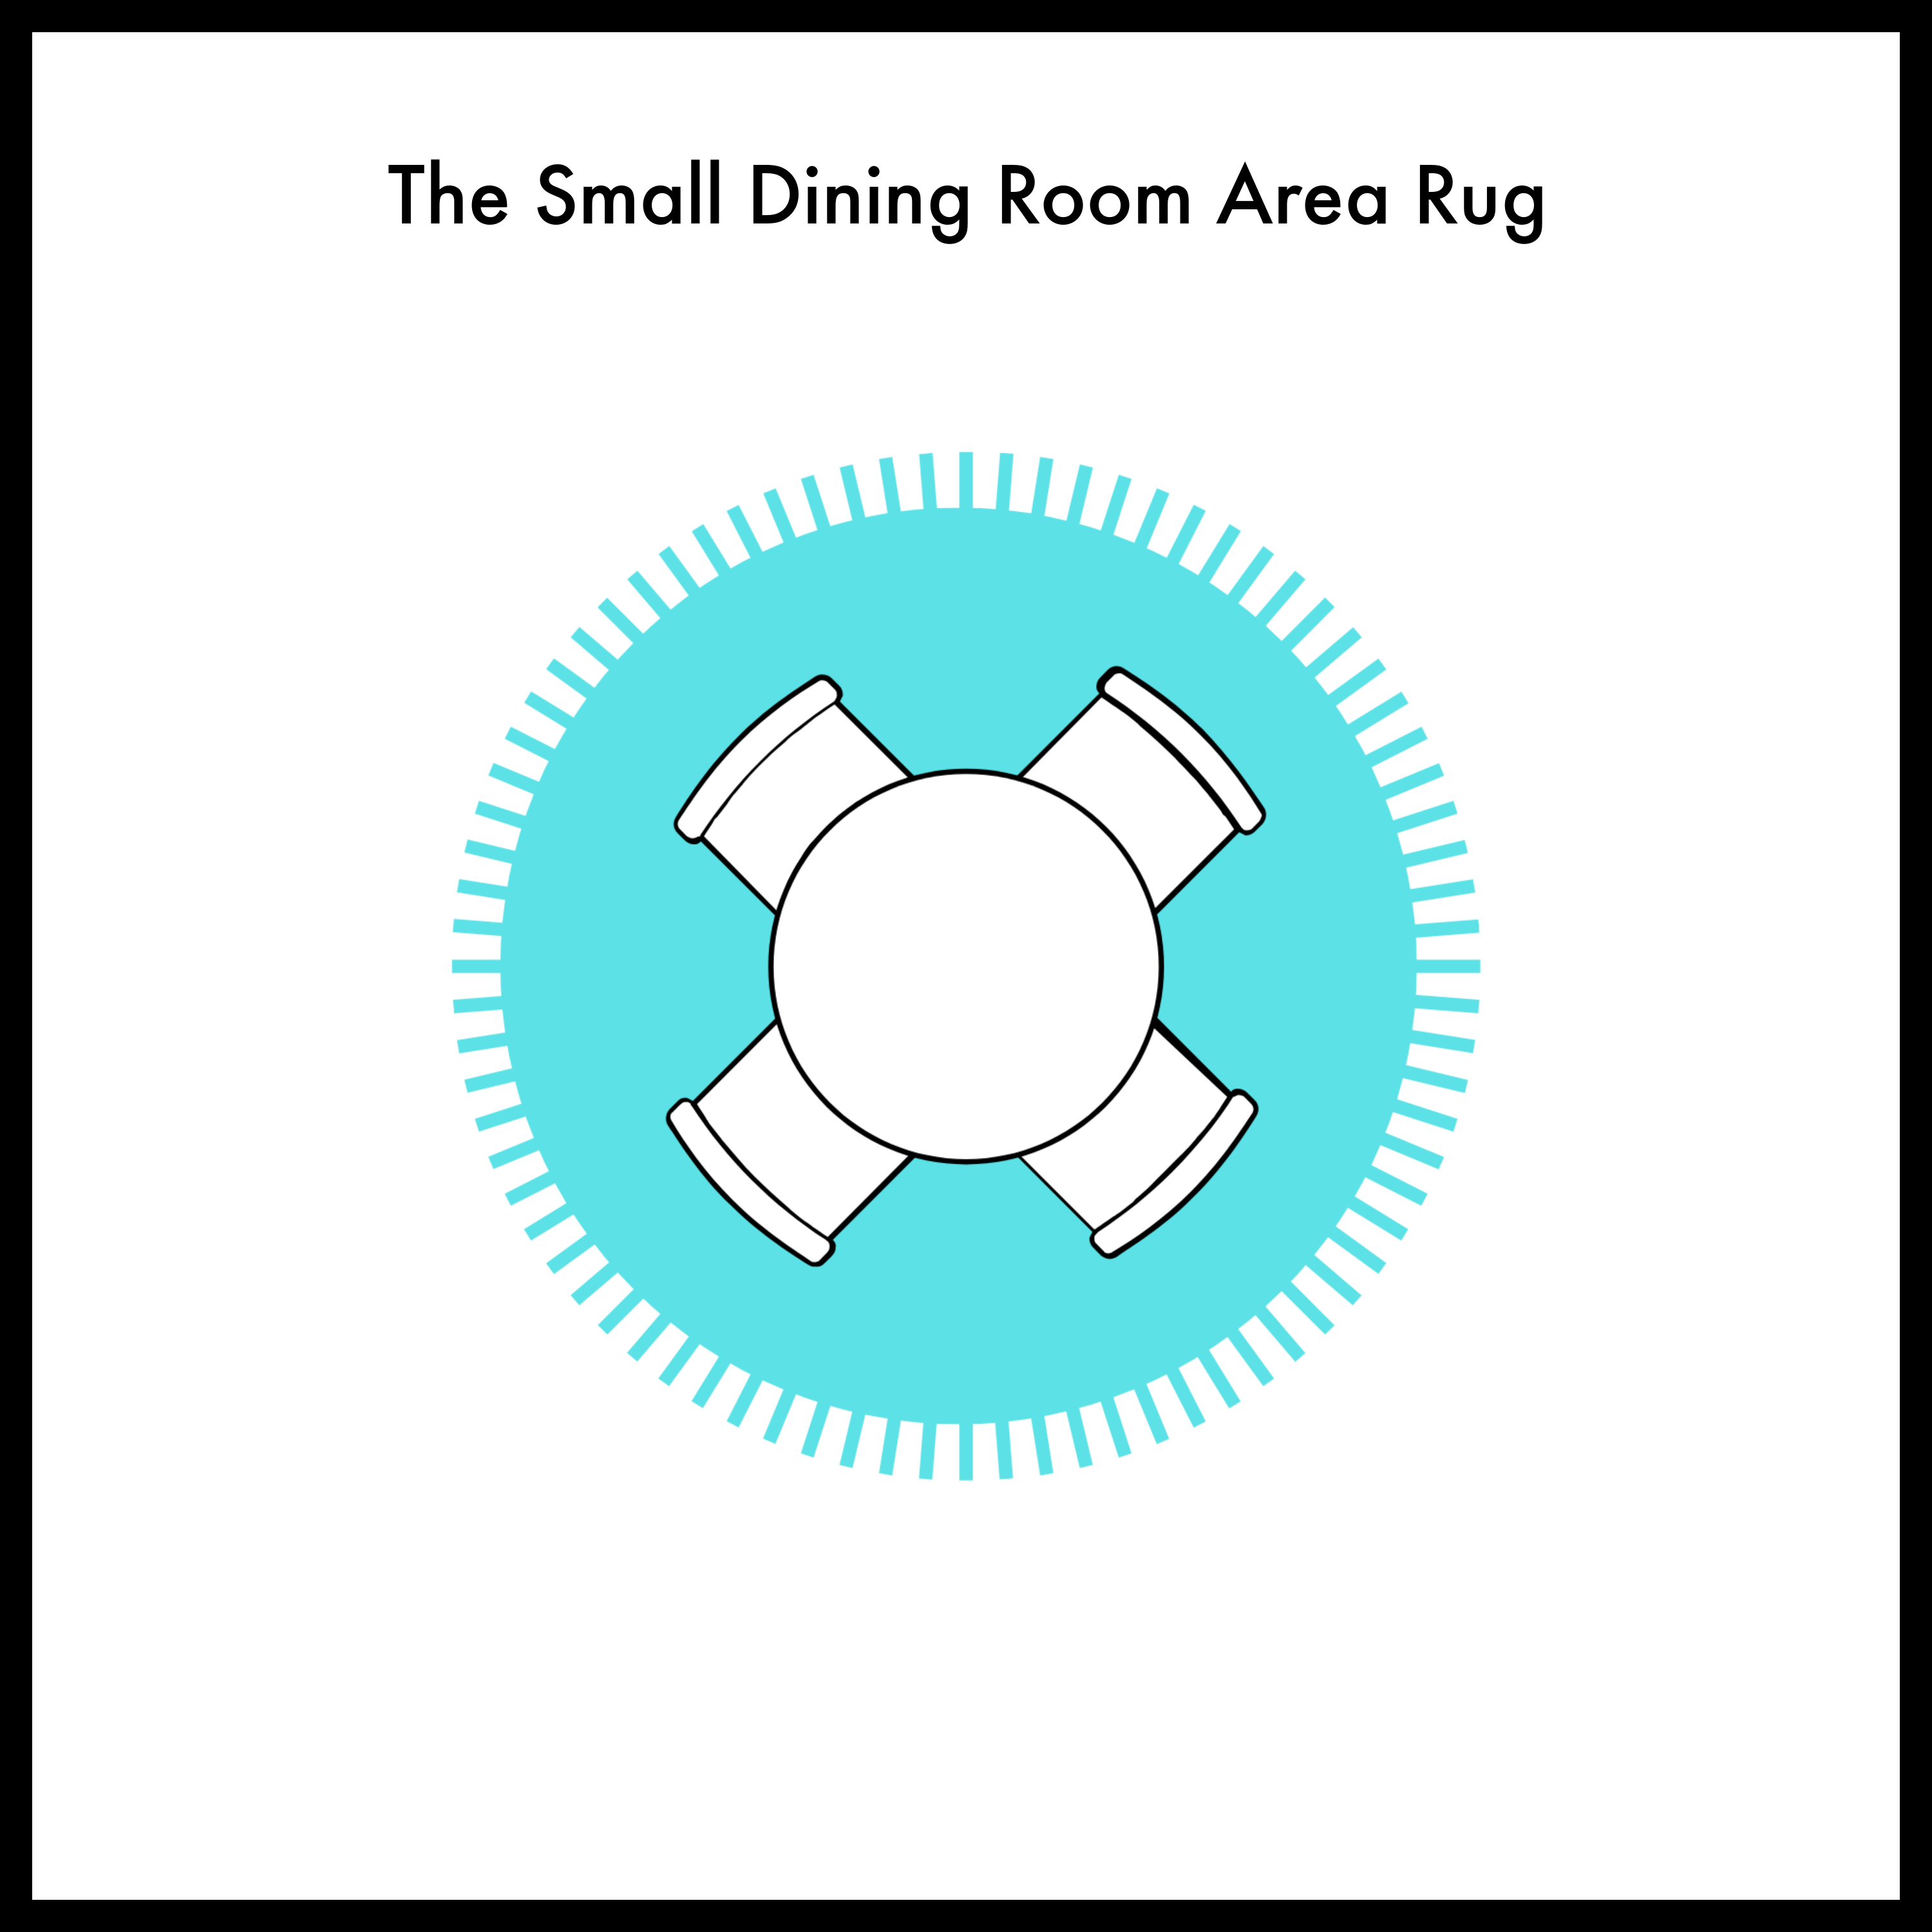 The Smaller Dining Room Area Rug